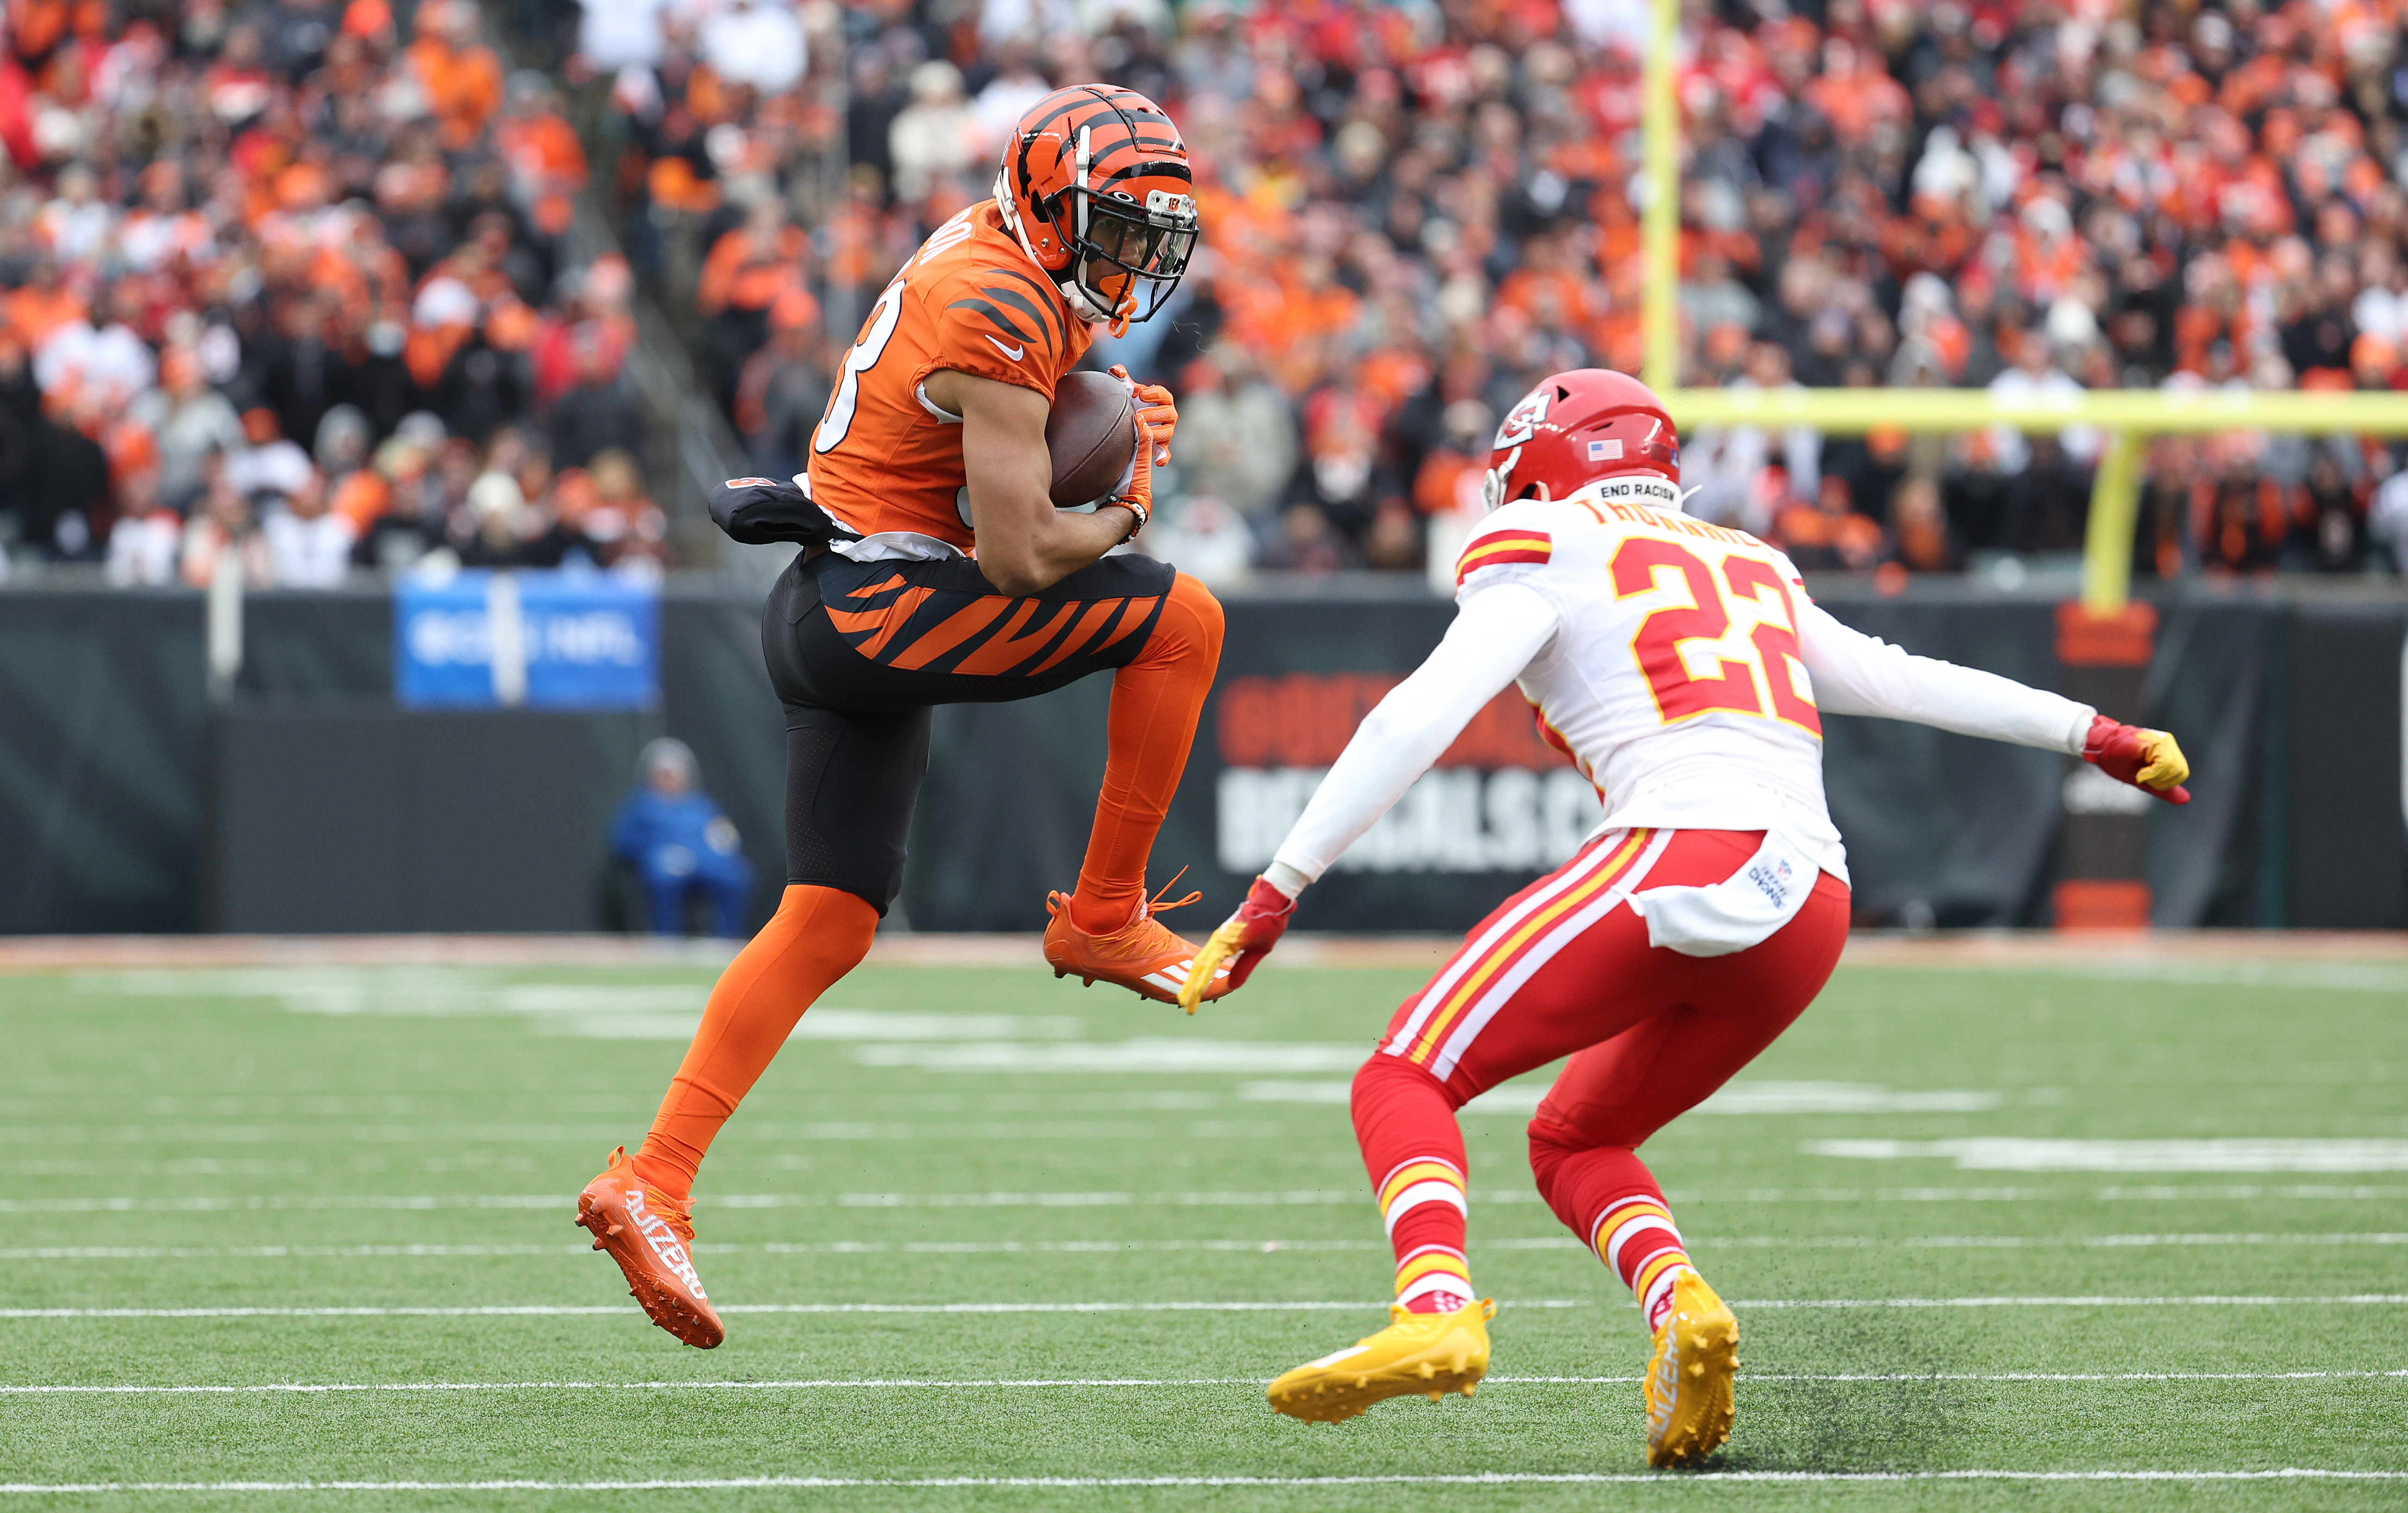 AFC Championship: Bengals vs Chiefs Date, Time, TV Channel & Location for NFL Playoff Game